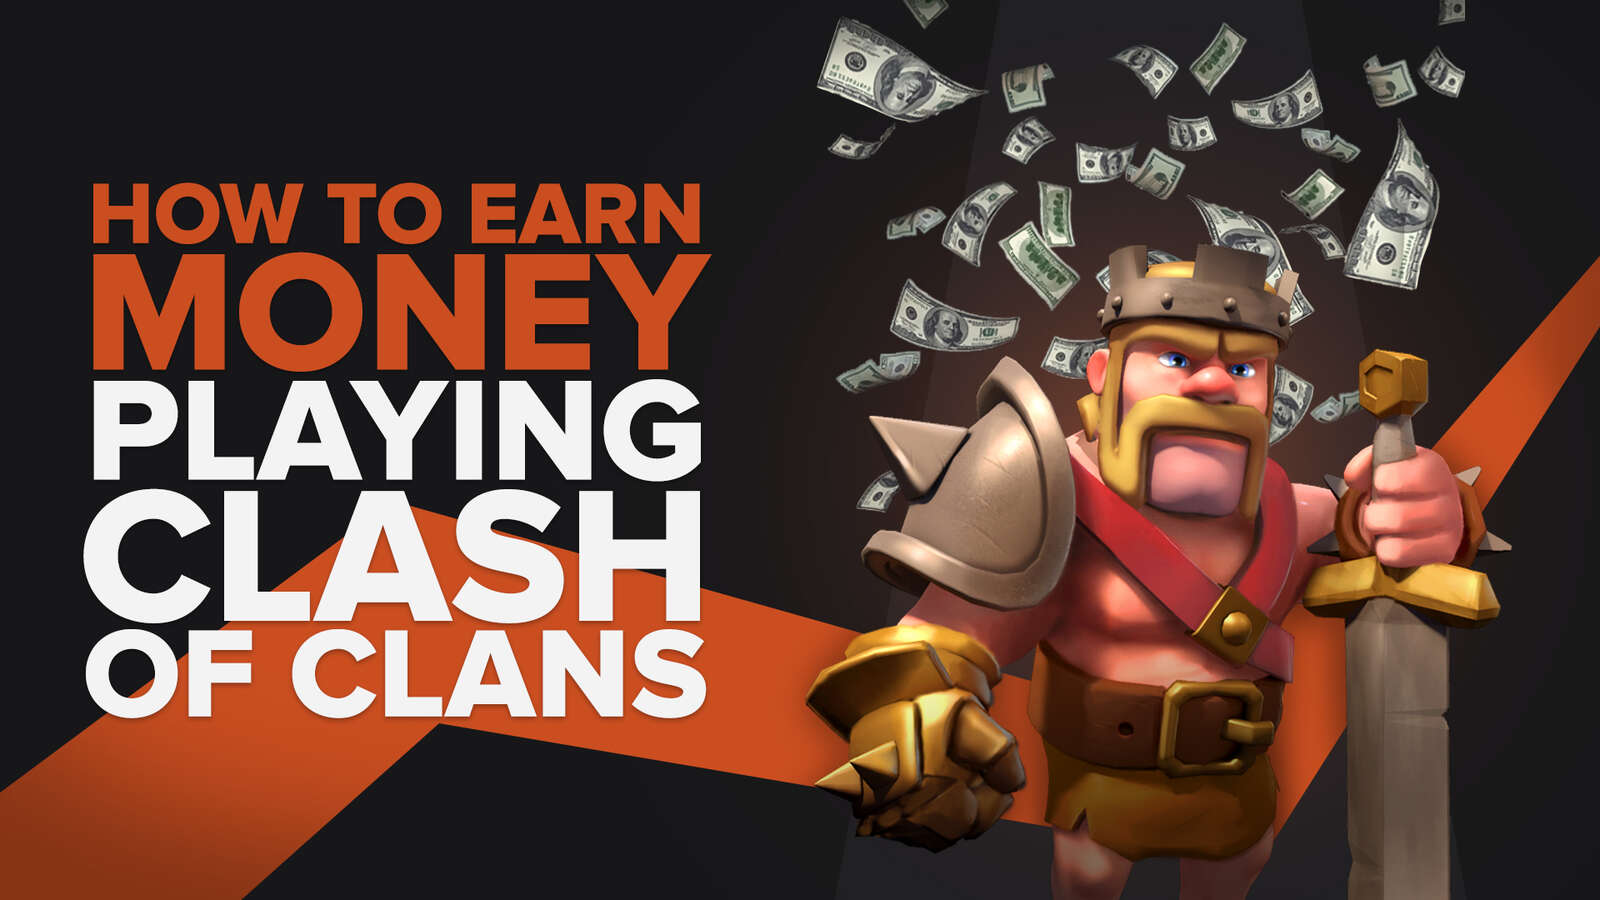 How To Earn Money Playing Clash Of Clans (5 Legit Ways)